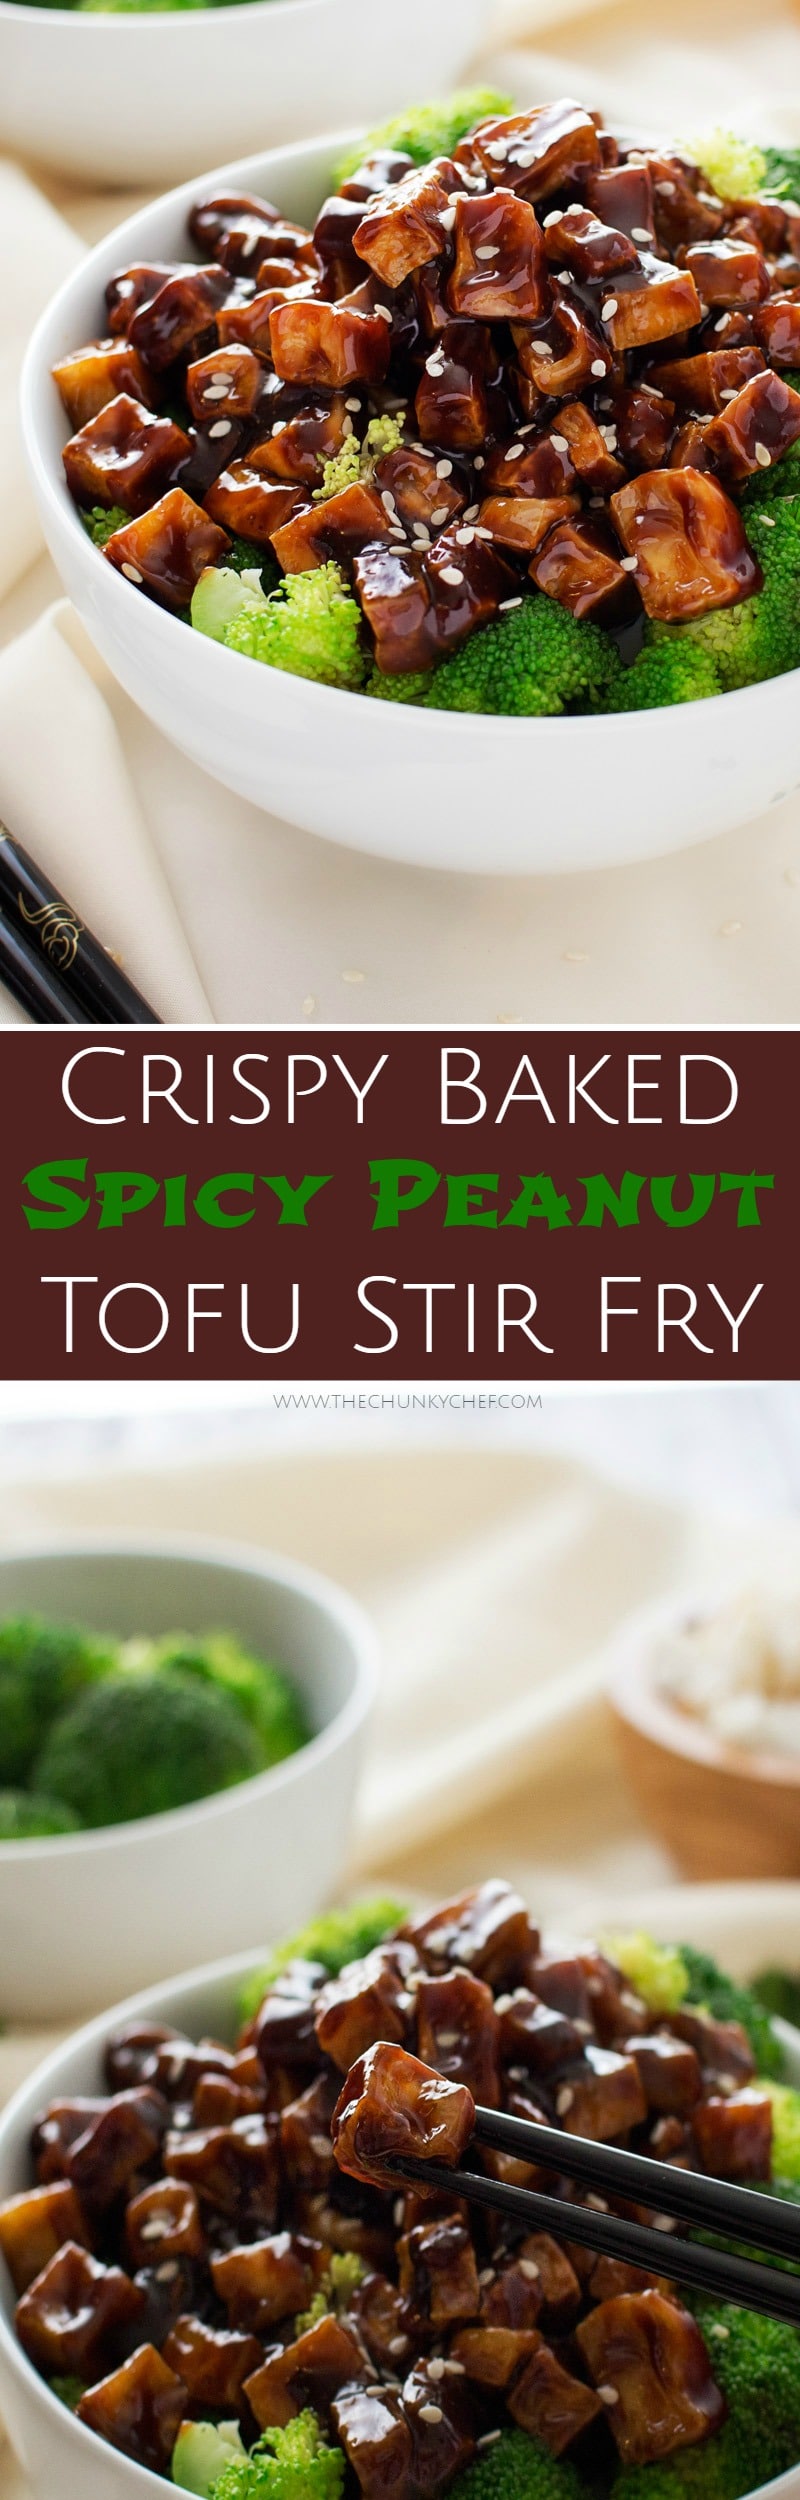 Crispy Spicy Peanut Tofu Stir Fry | The Chunky Chef | This tofu stir fry is great for vegetarians and meat eaters alike! Crispy baked tofu is stir fried in a deliciously flavorful spicy peanut sauce!